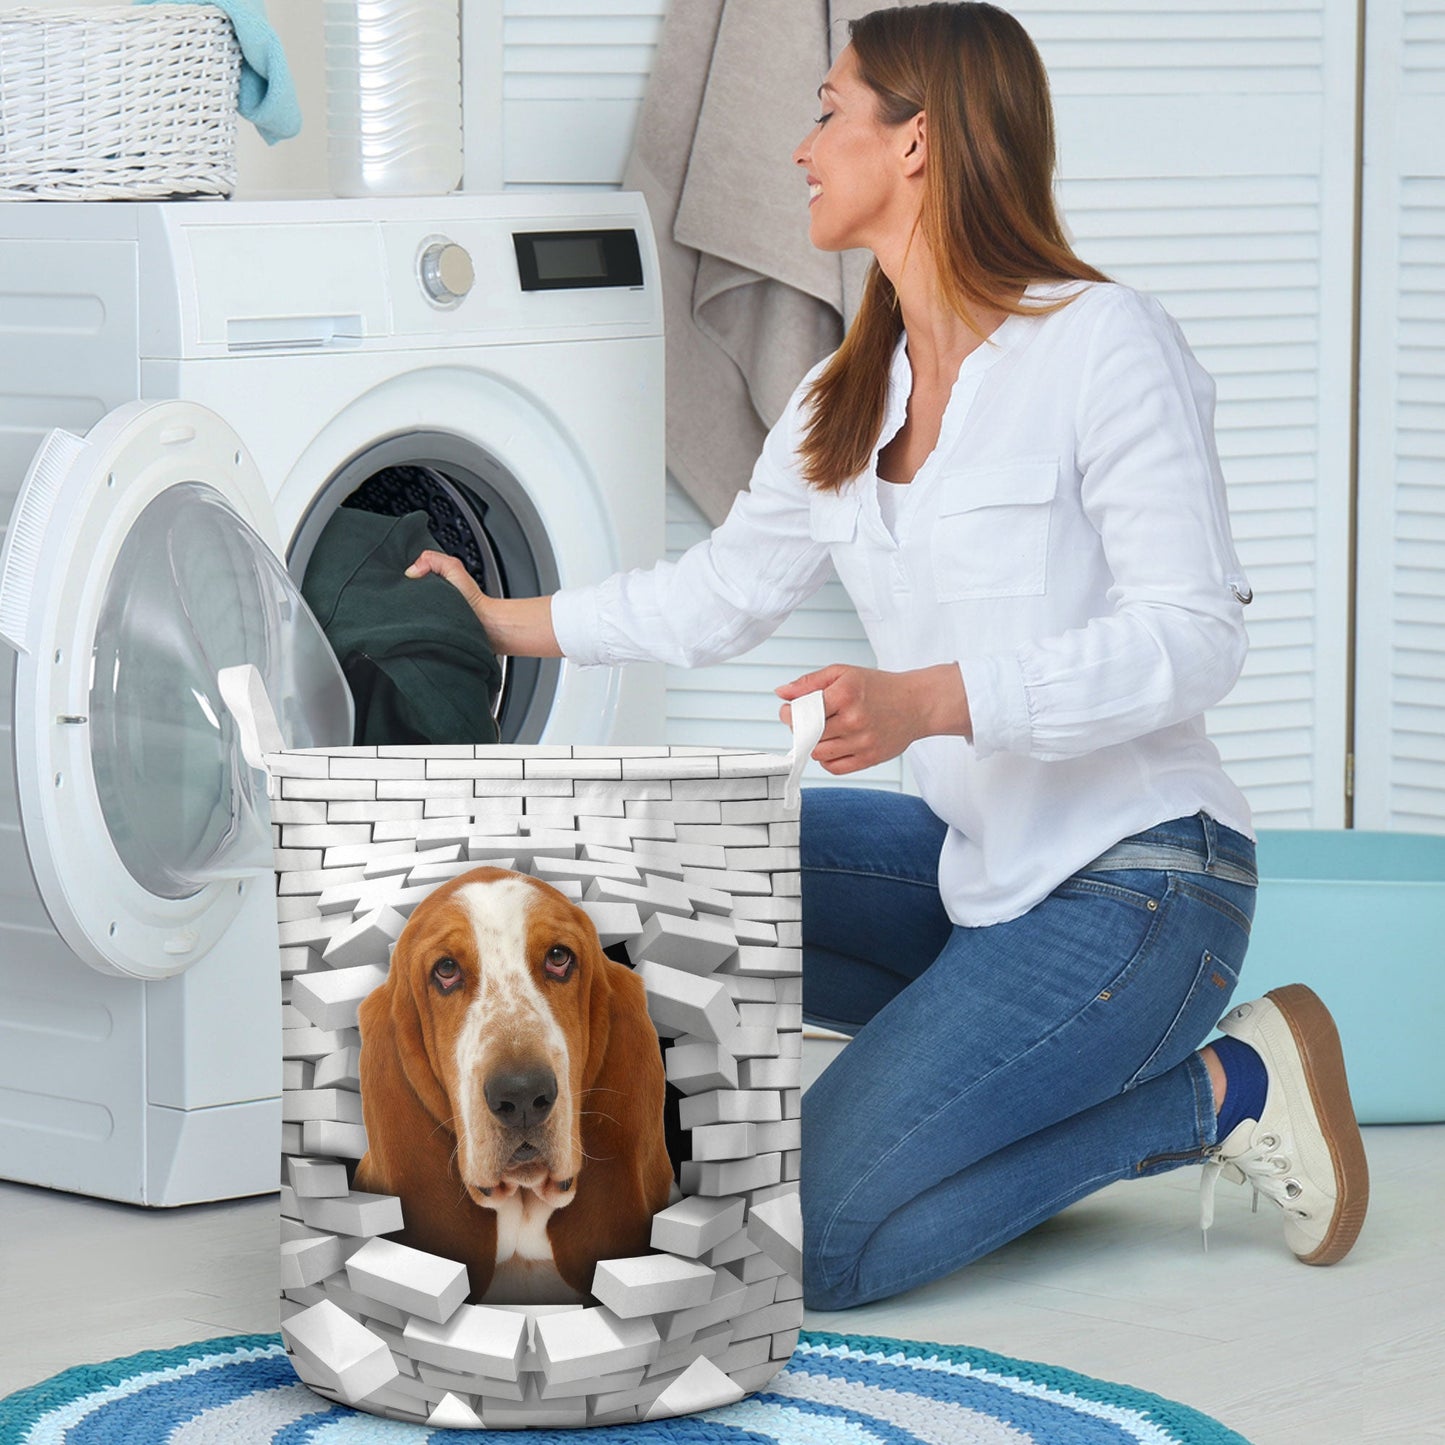 Basset Hound - In The Hole Of Wall Pattern Laundry Basket